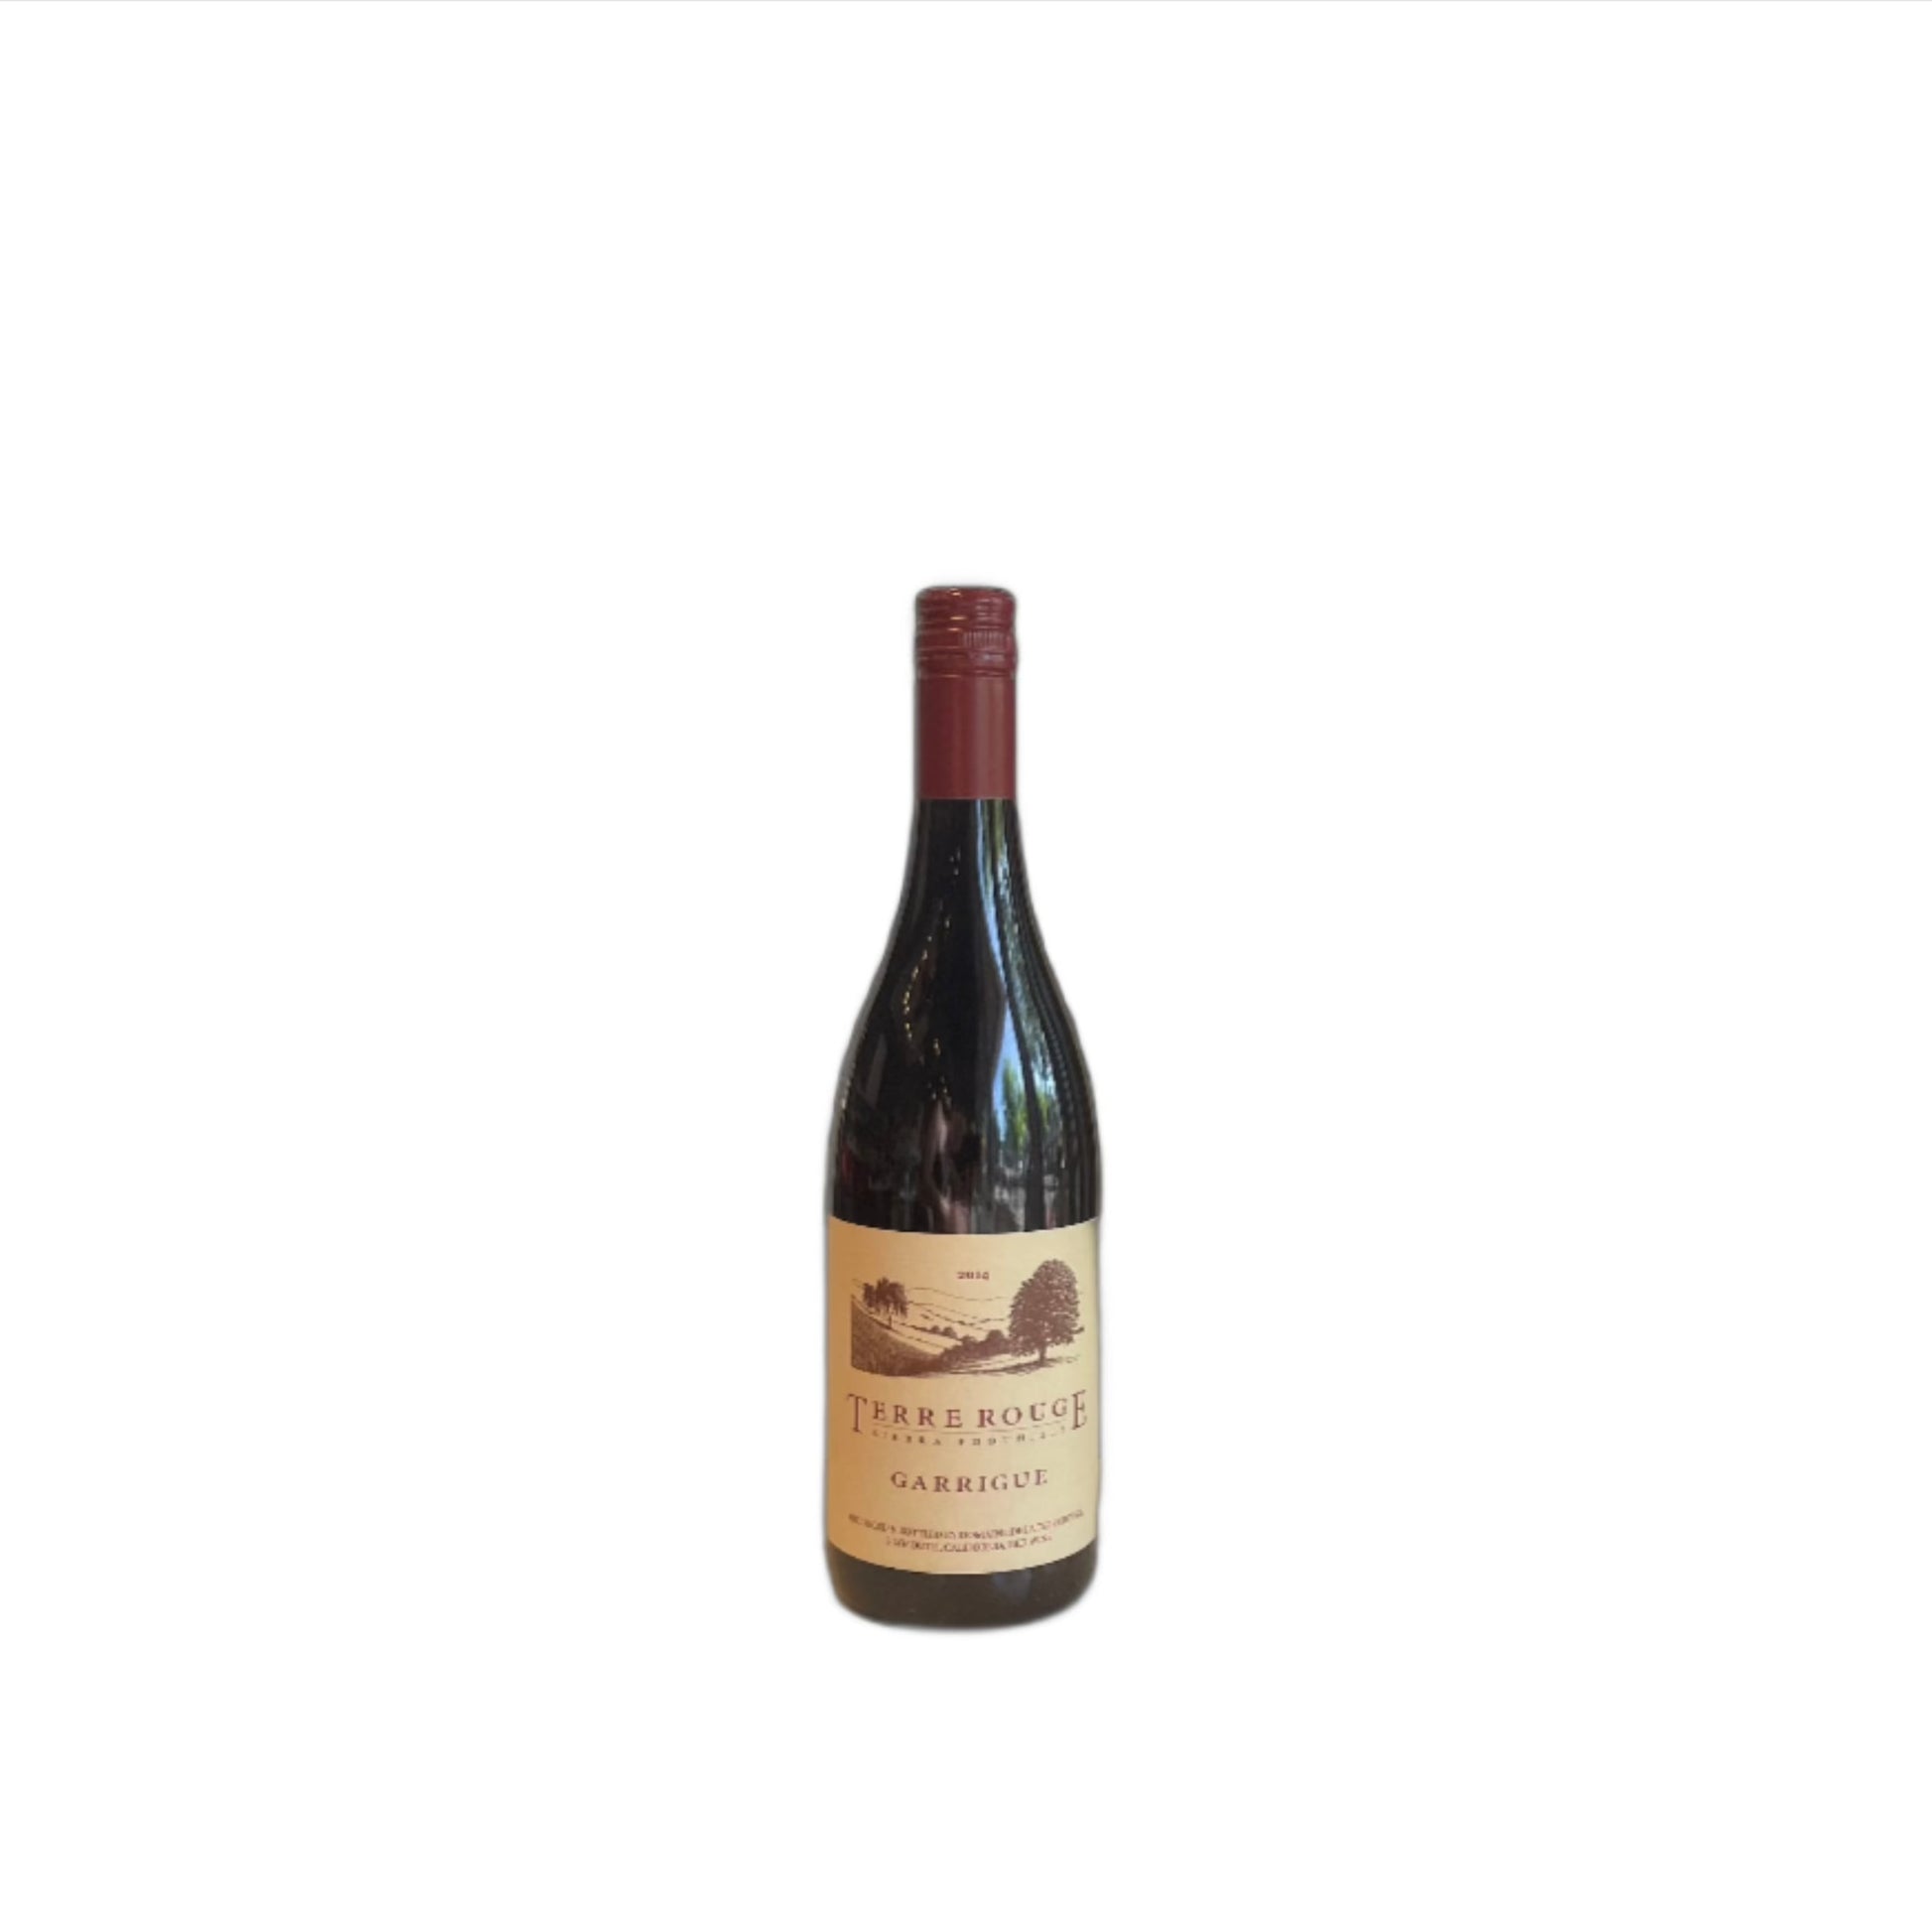 Terre Rouge Garrigue - Syrah, Cabernet Sauvignon Blend from Sierra Foothills, California